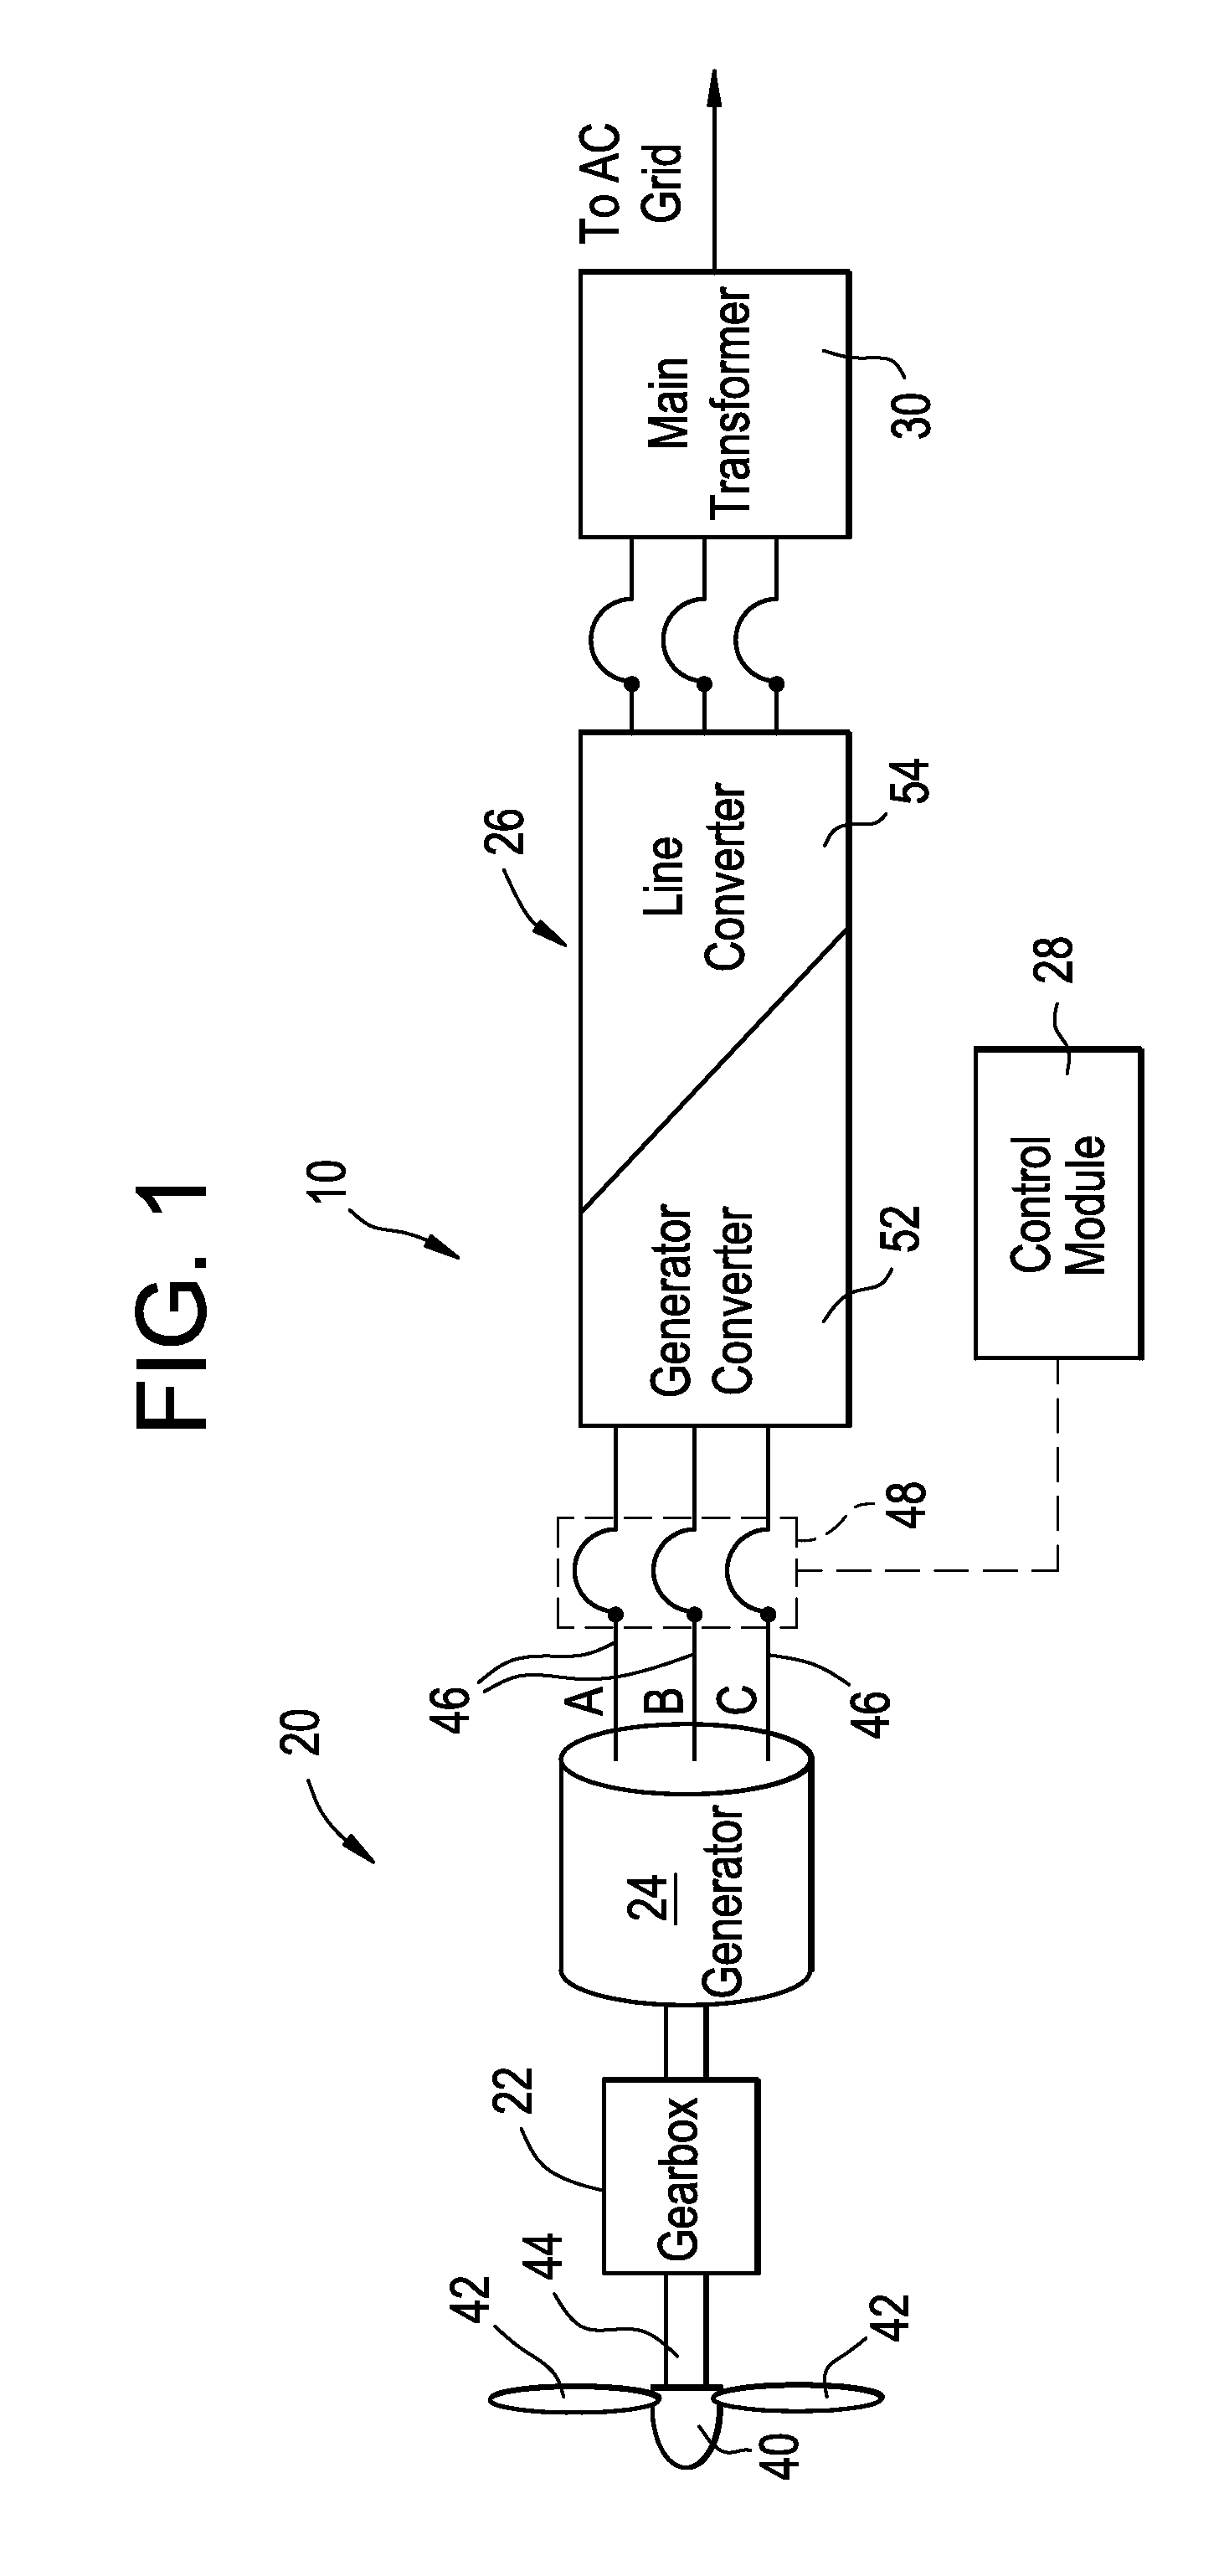 Fault detection system for a generator